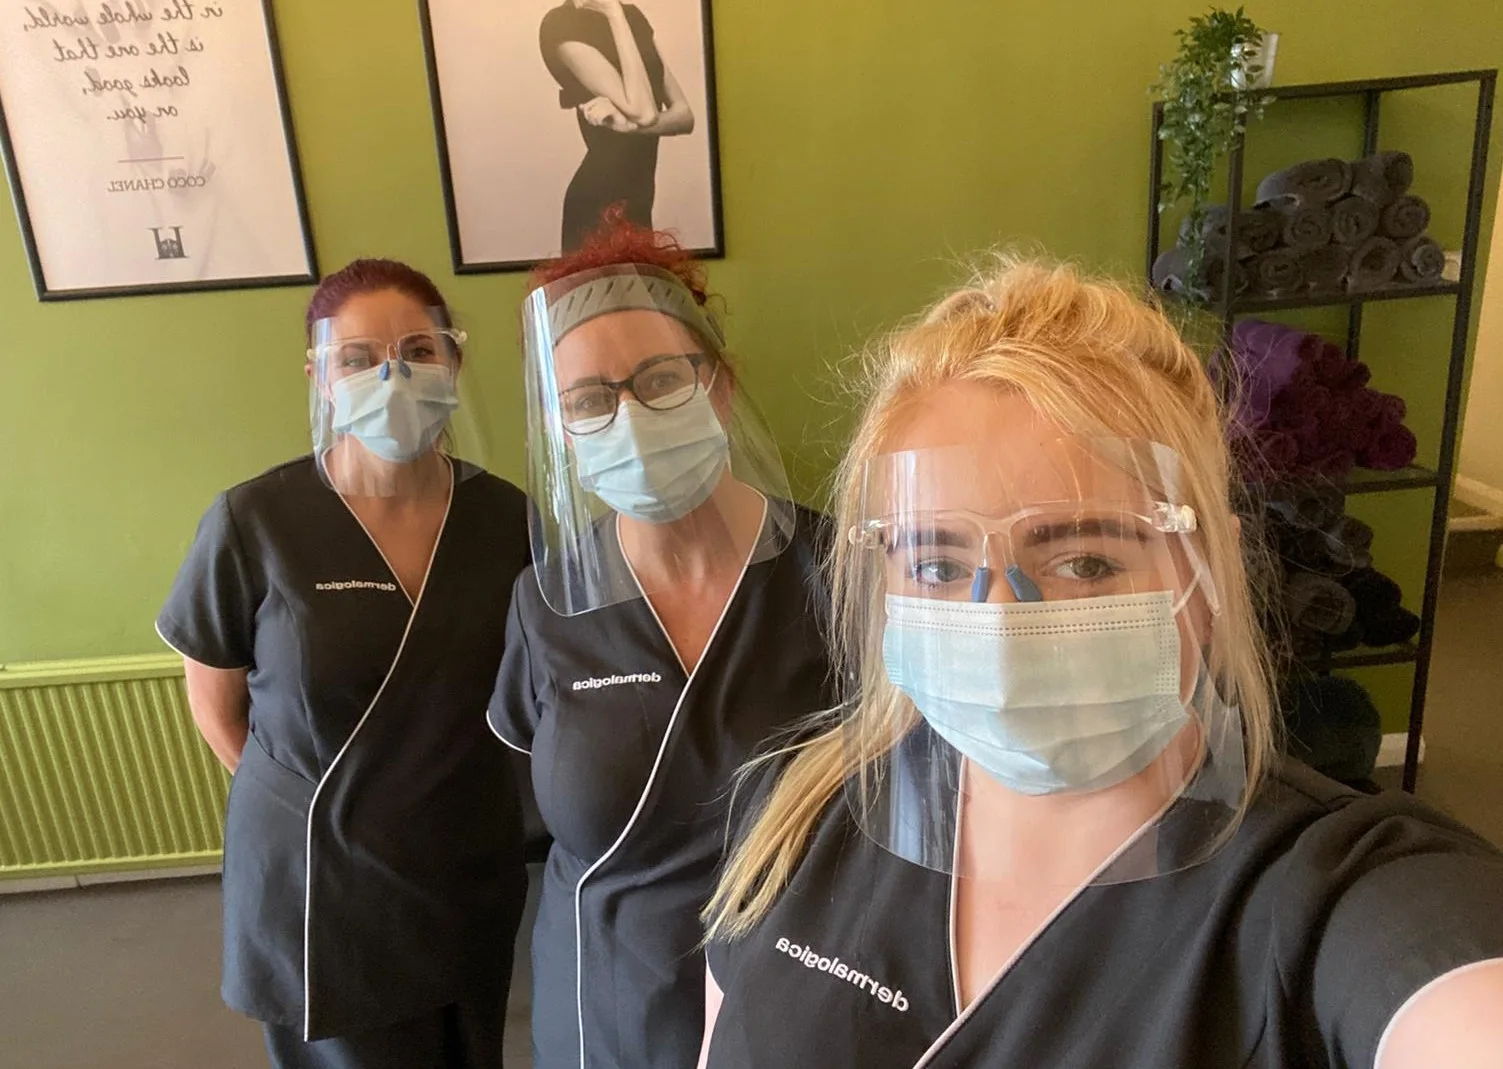 Salon Life During a Pandemic's Image